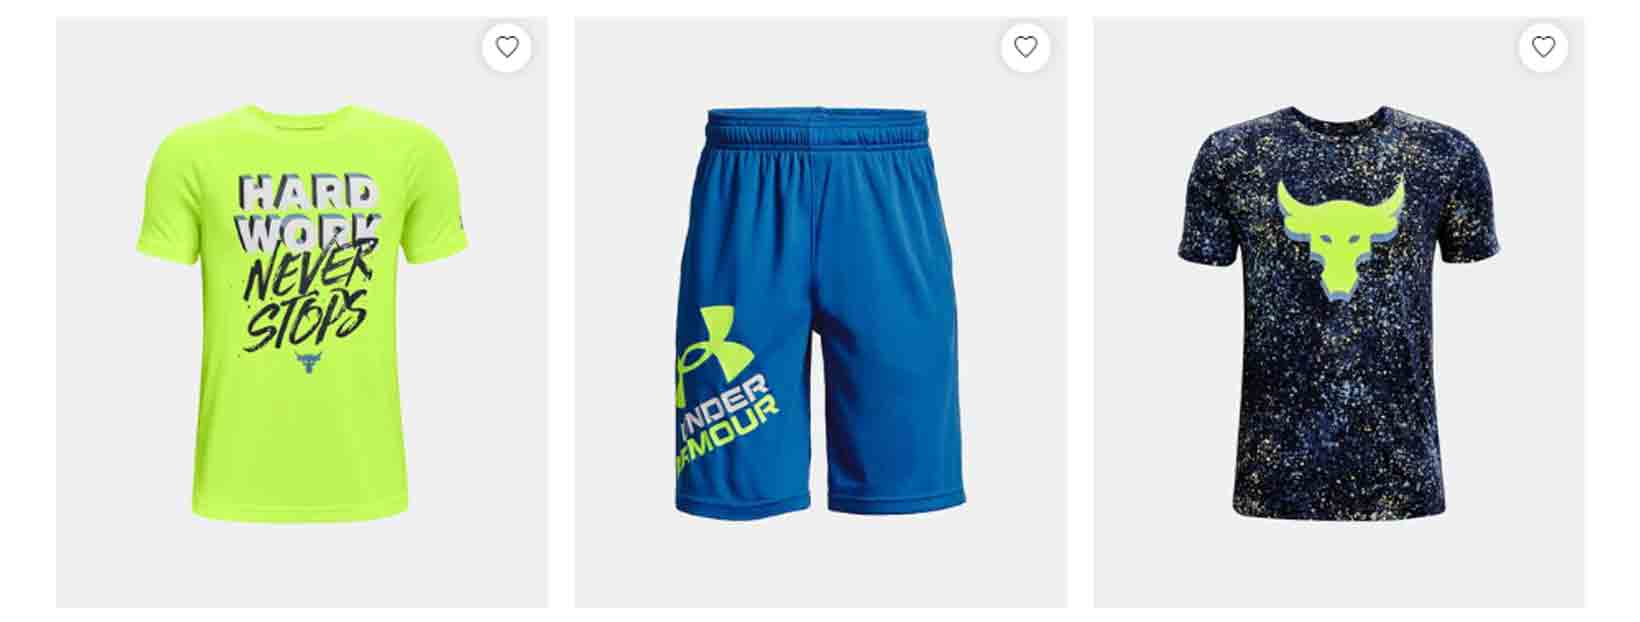 Under Armour Codes For Kids Collection